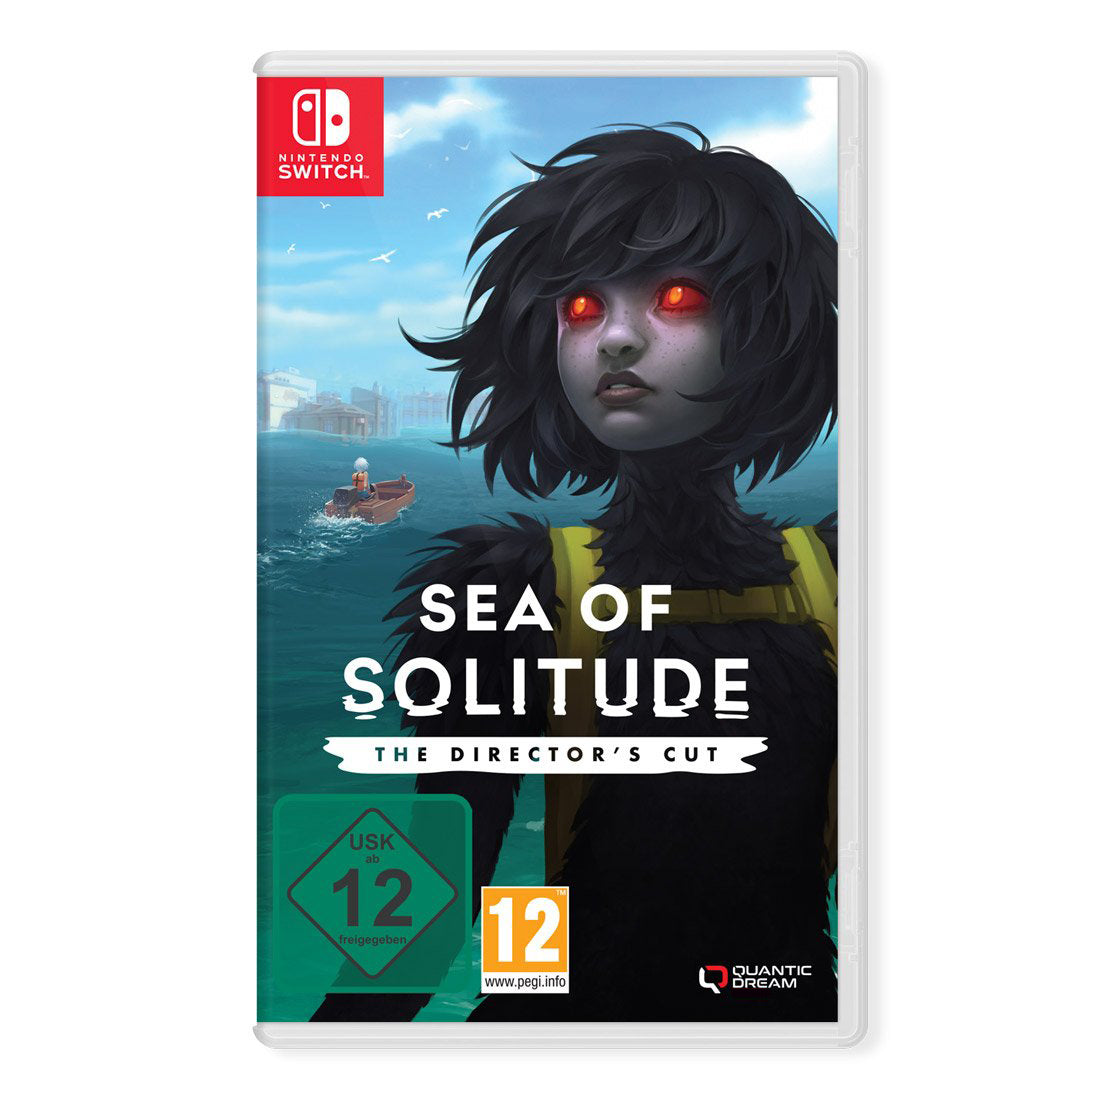 sindsyg behandle Sorg Sea of Solitude: The Director's Cut on Nintendo Switch - Quantic Dream